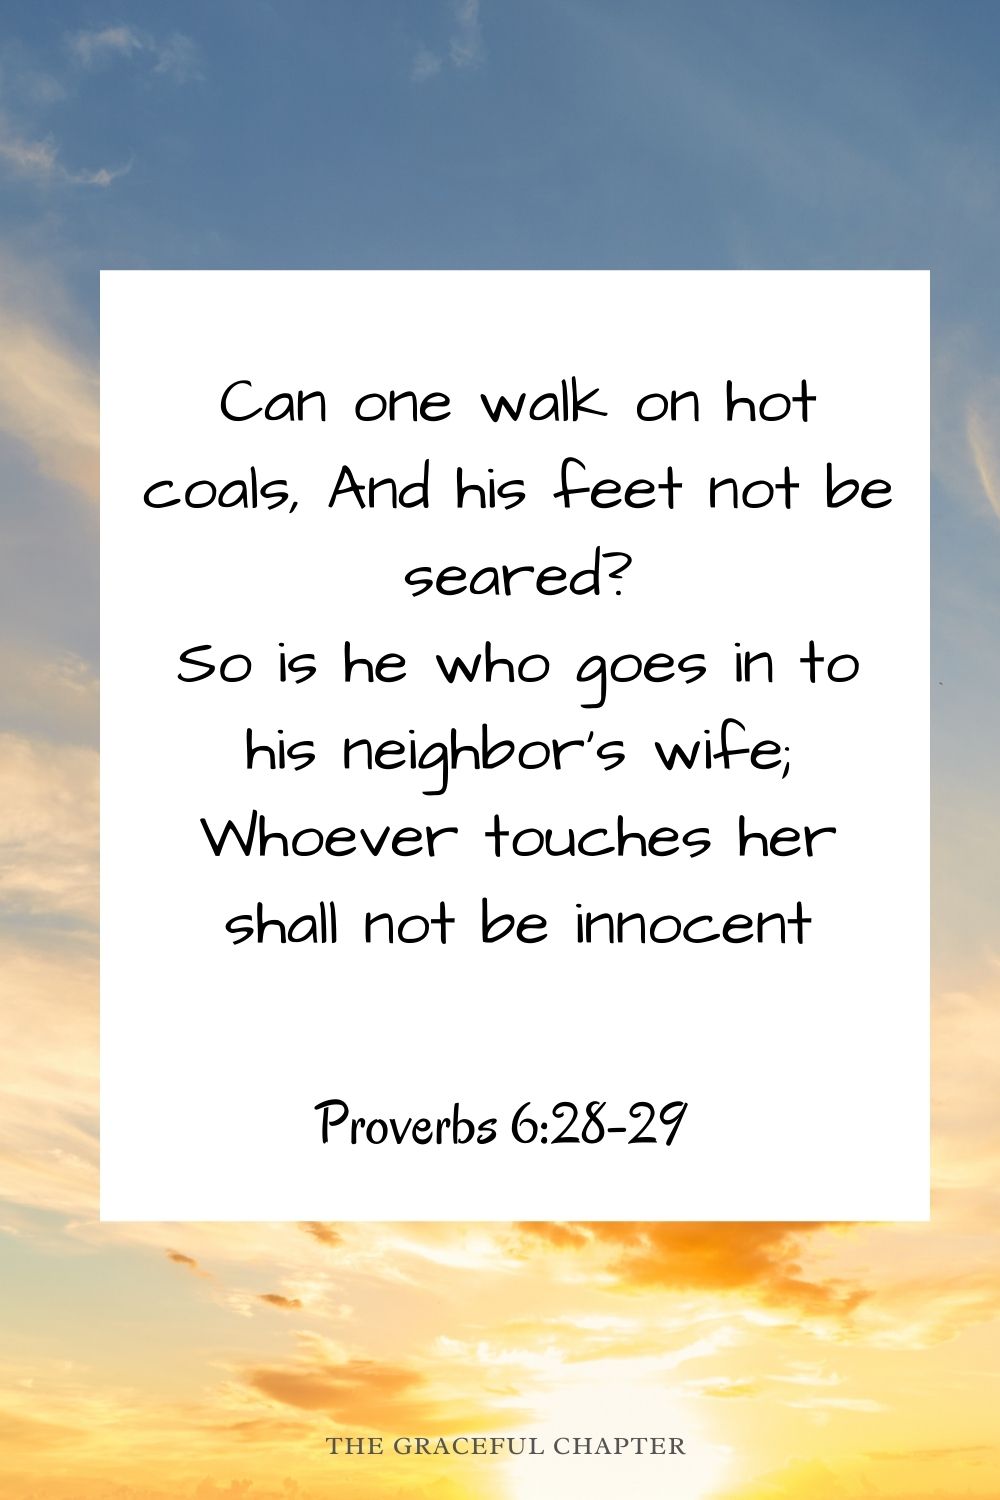 Can one walk on hot coals, And his feet not be seared? So is he who goes in to his neighbor’s wife; Whoever touches her shall not be innocent Proverbs 6:28-29